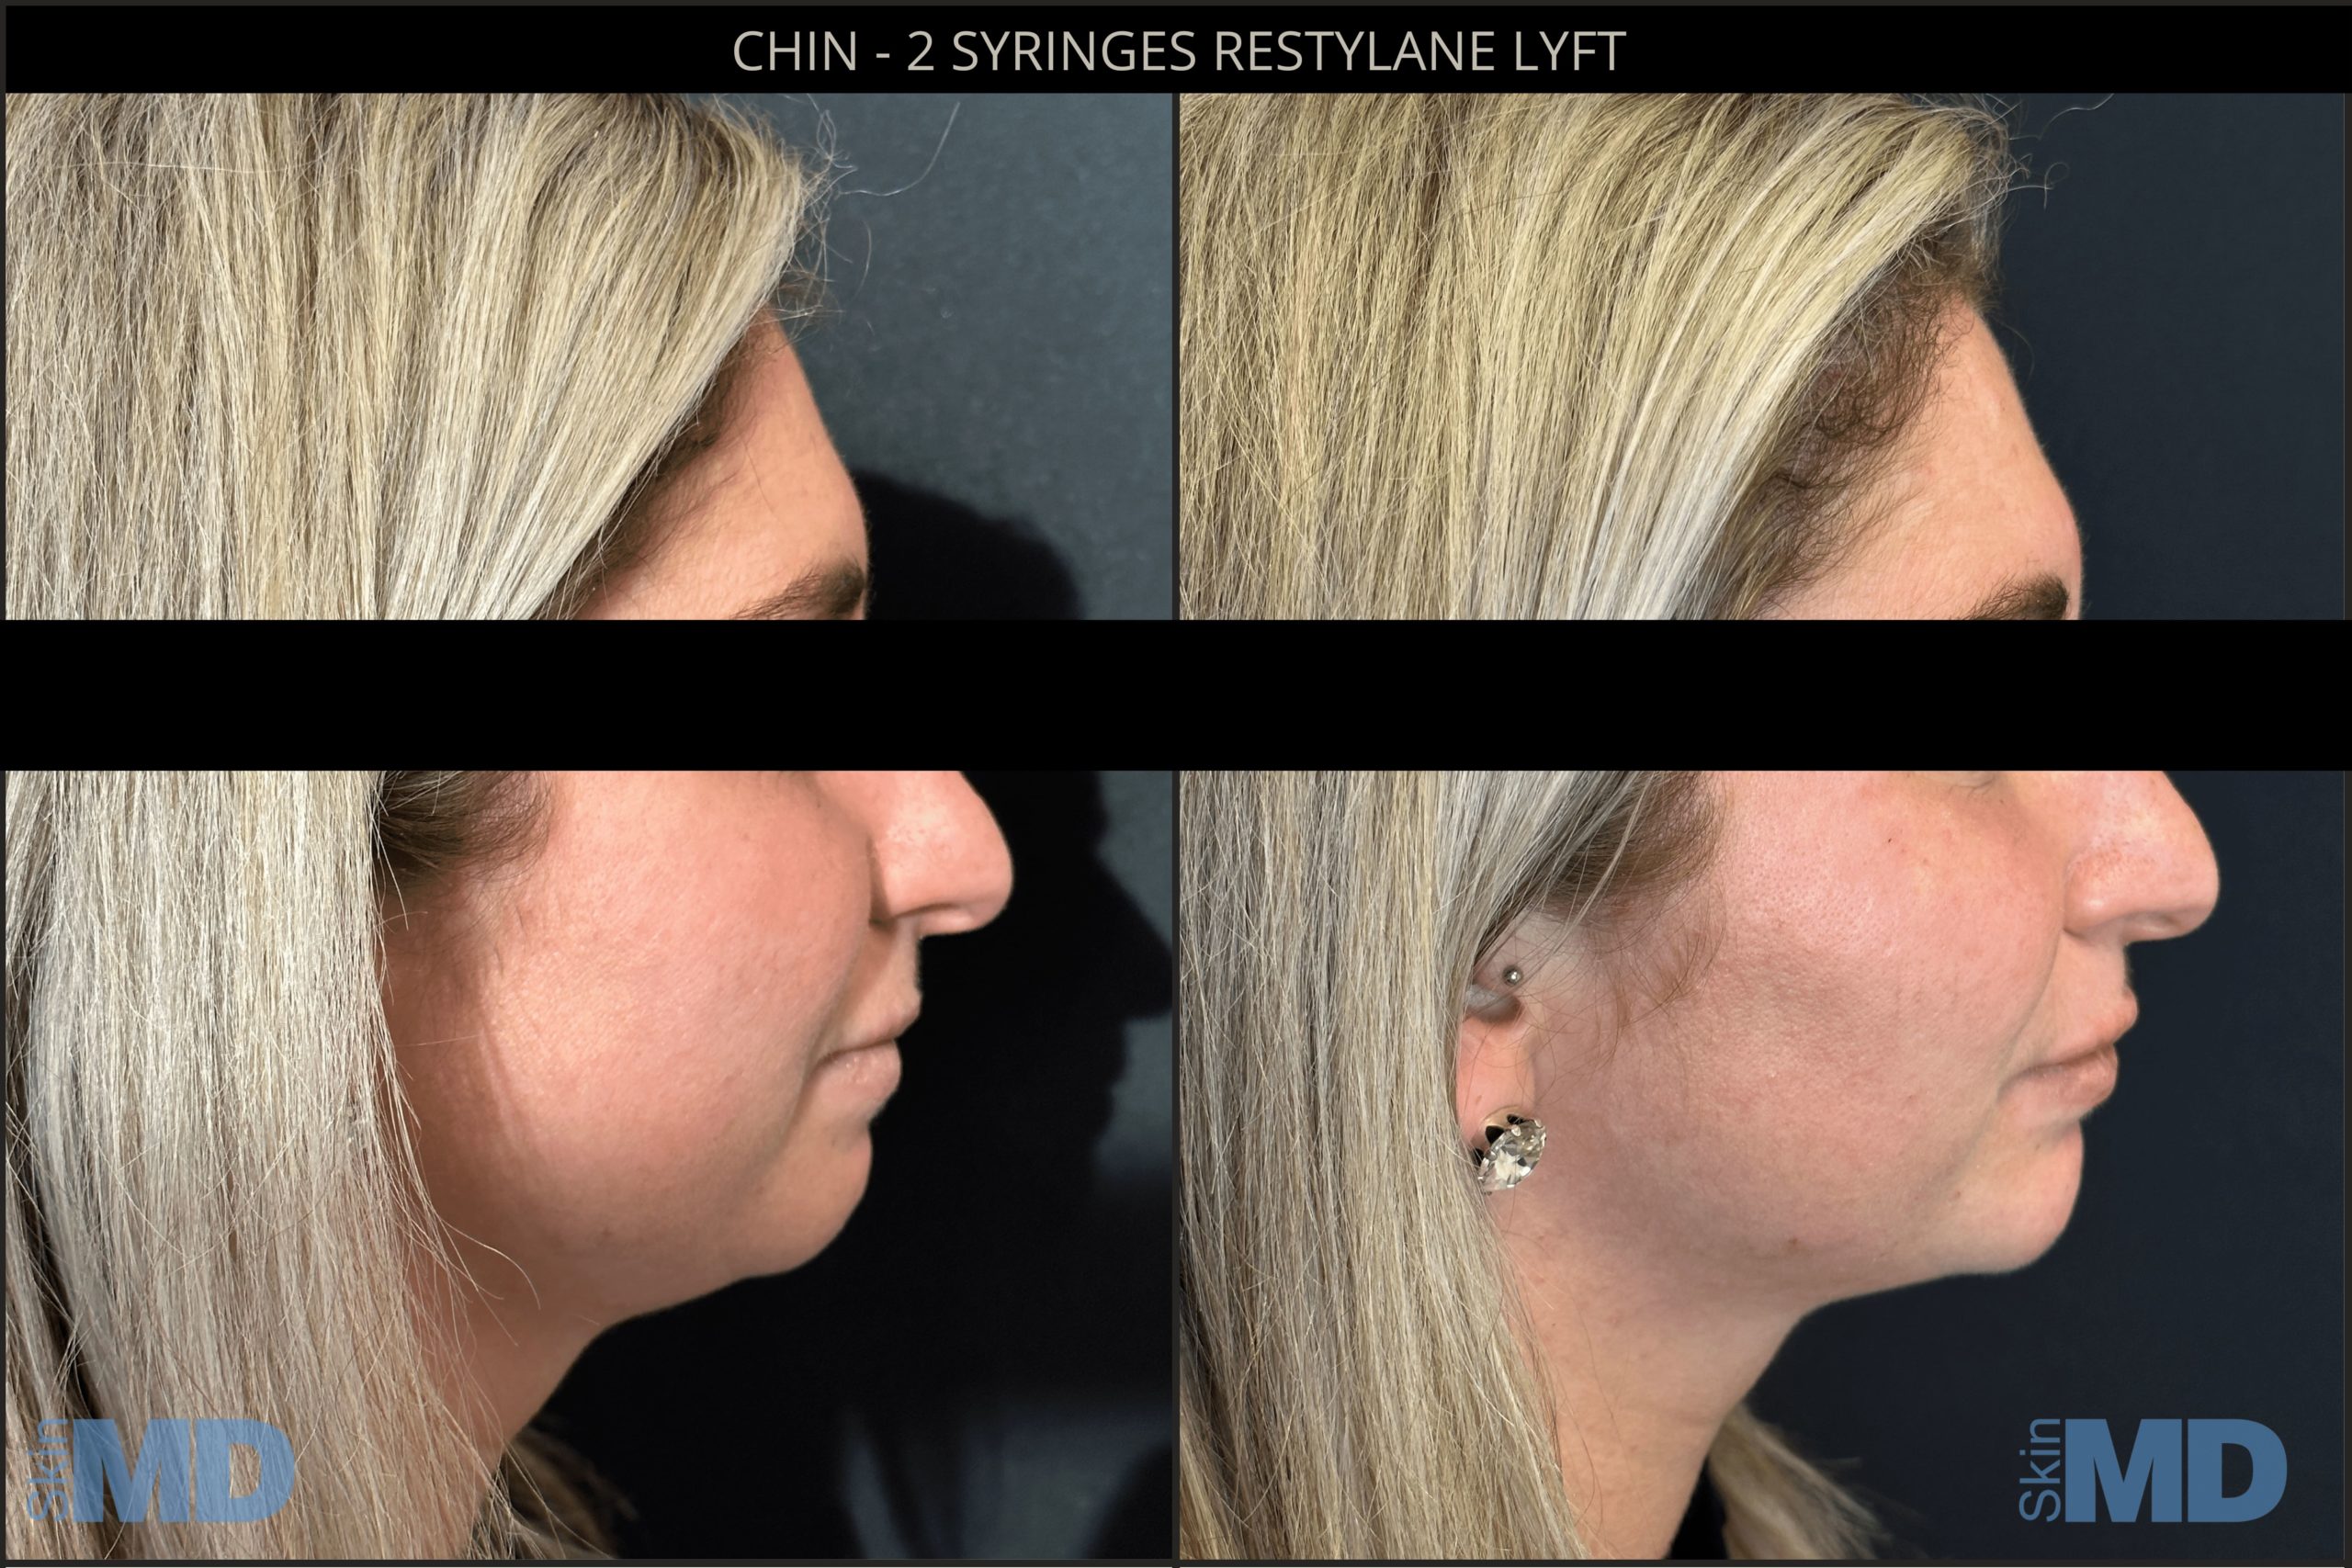 Before and after dermal fillers results